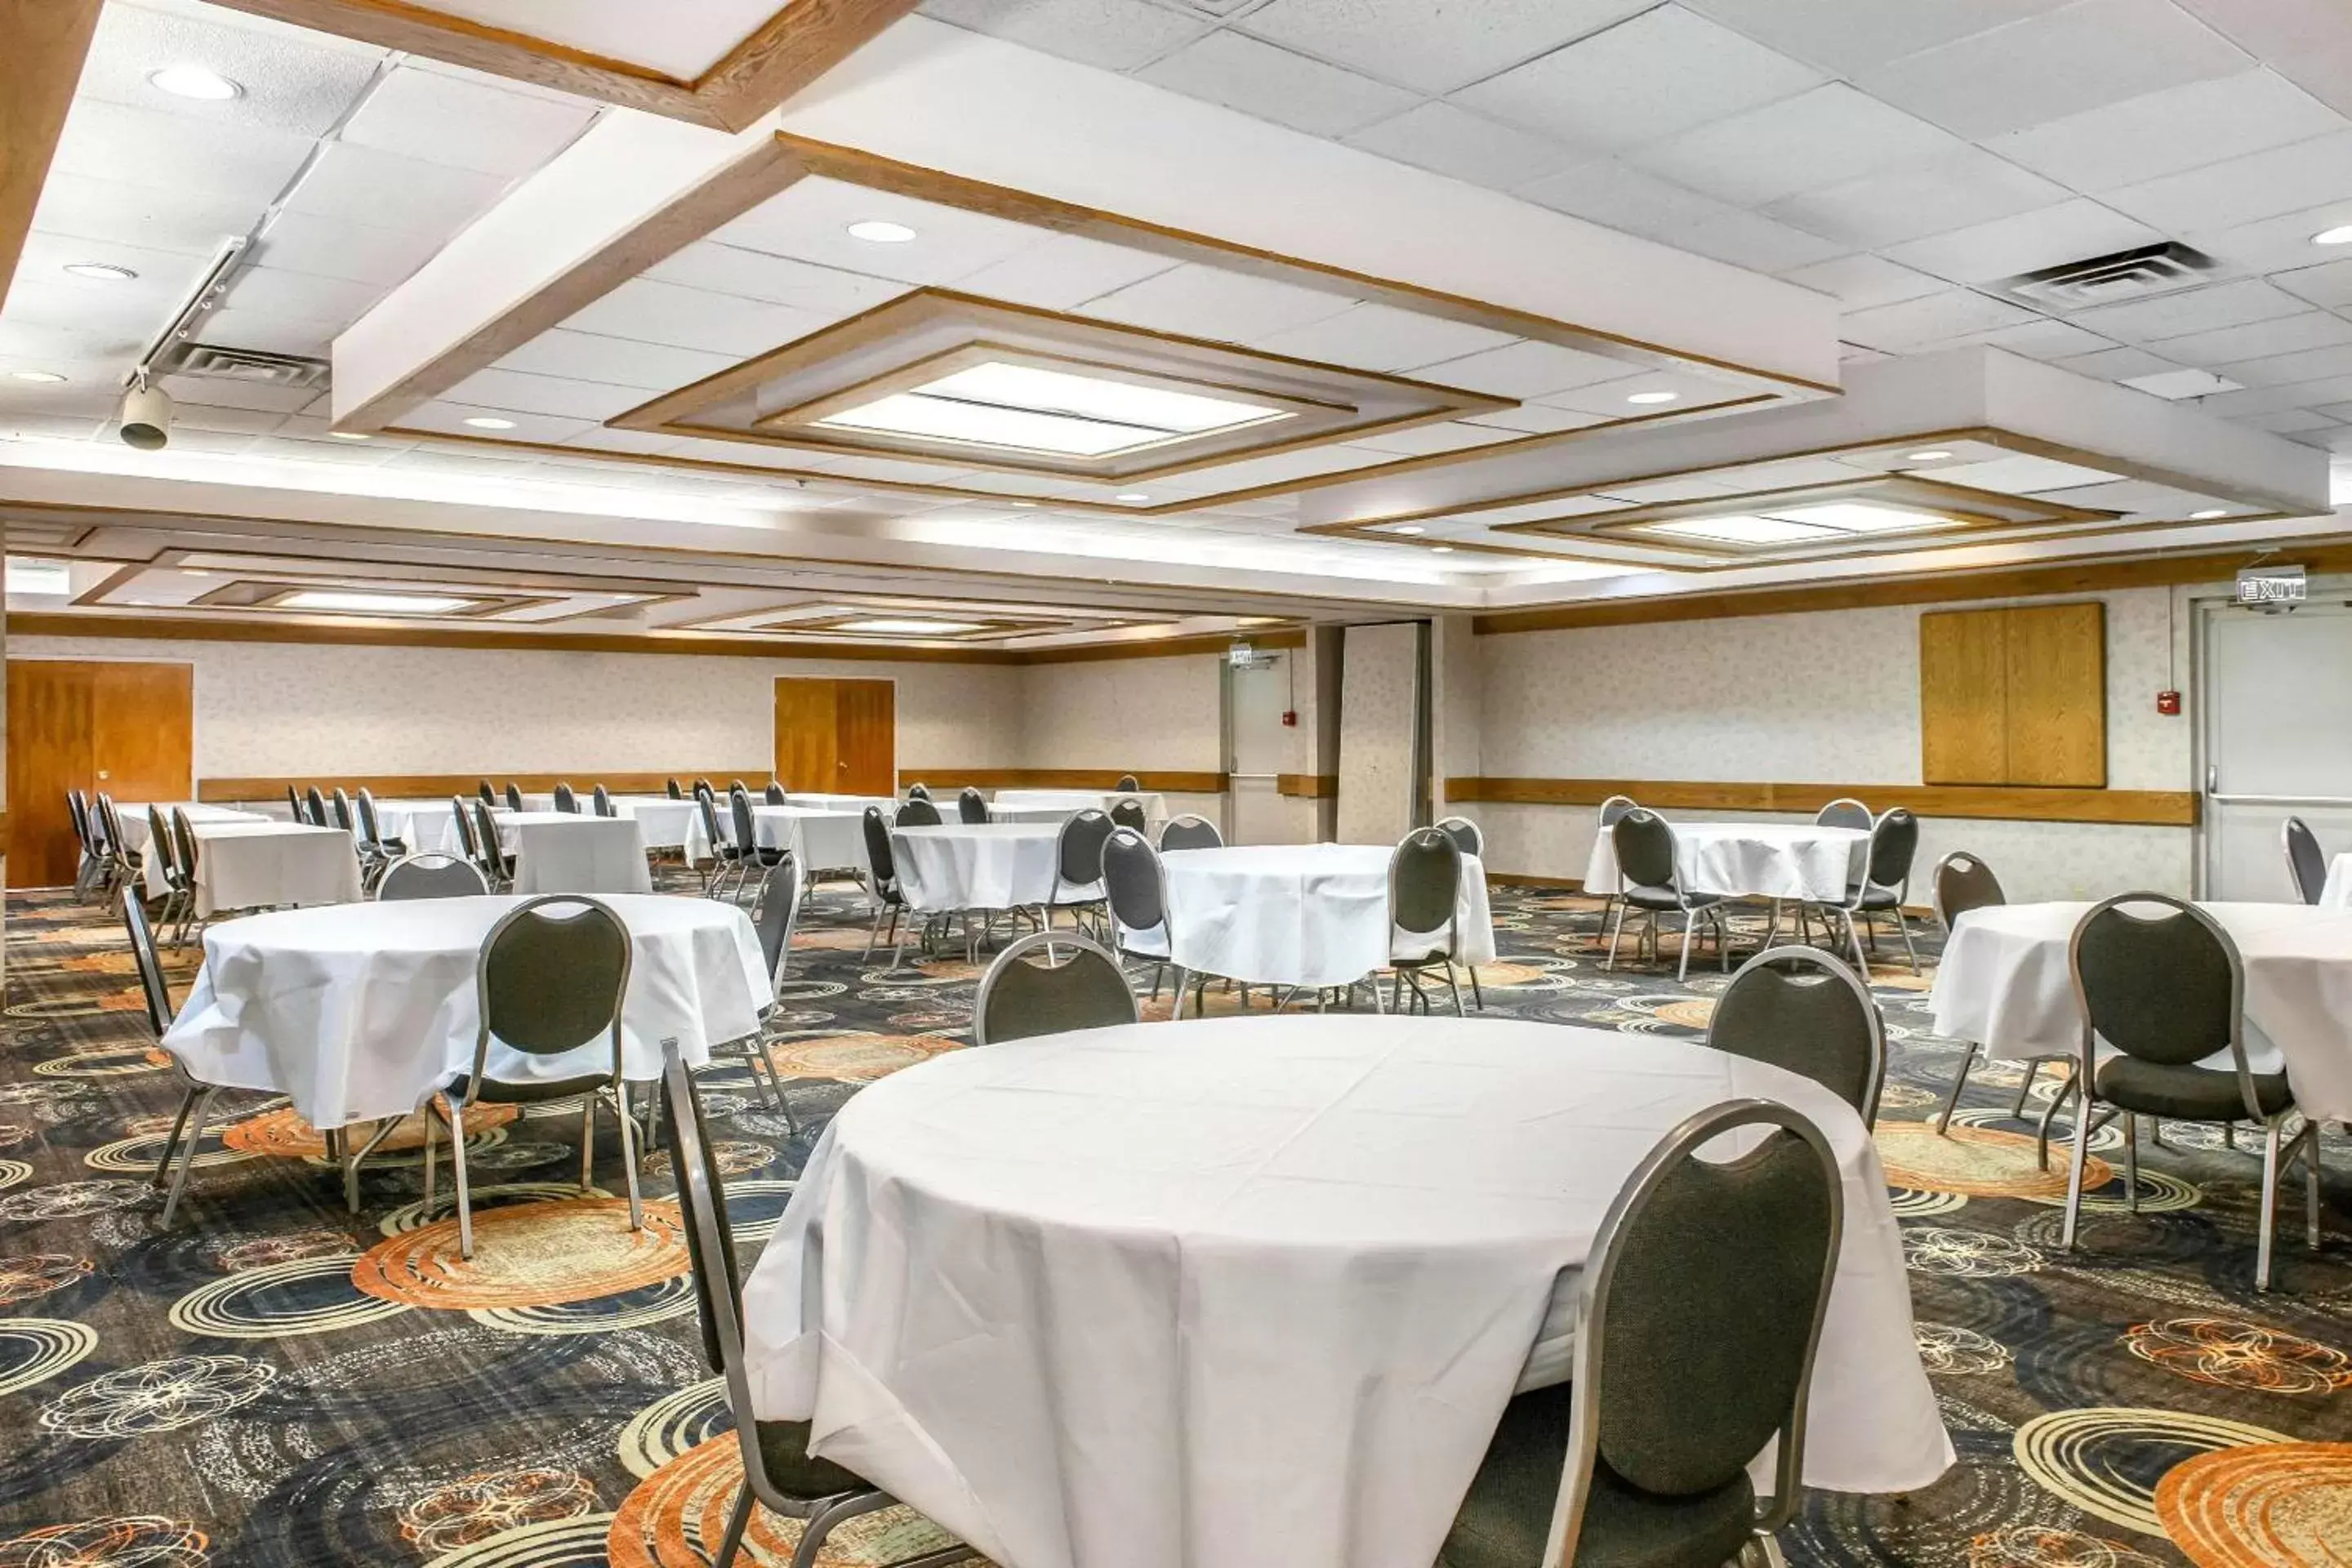 On site, Banquet Facilities in Quality Inn Conference Center Logansport